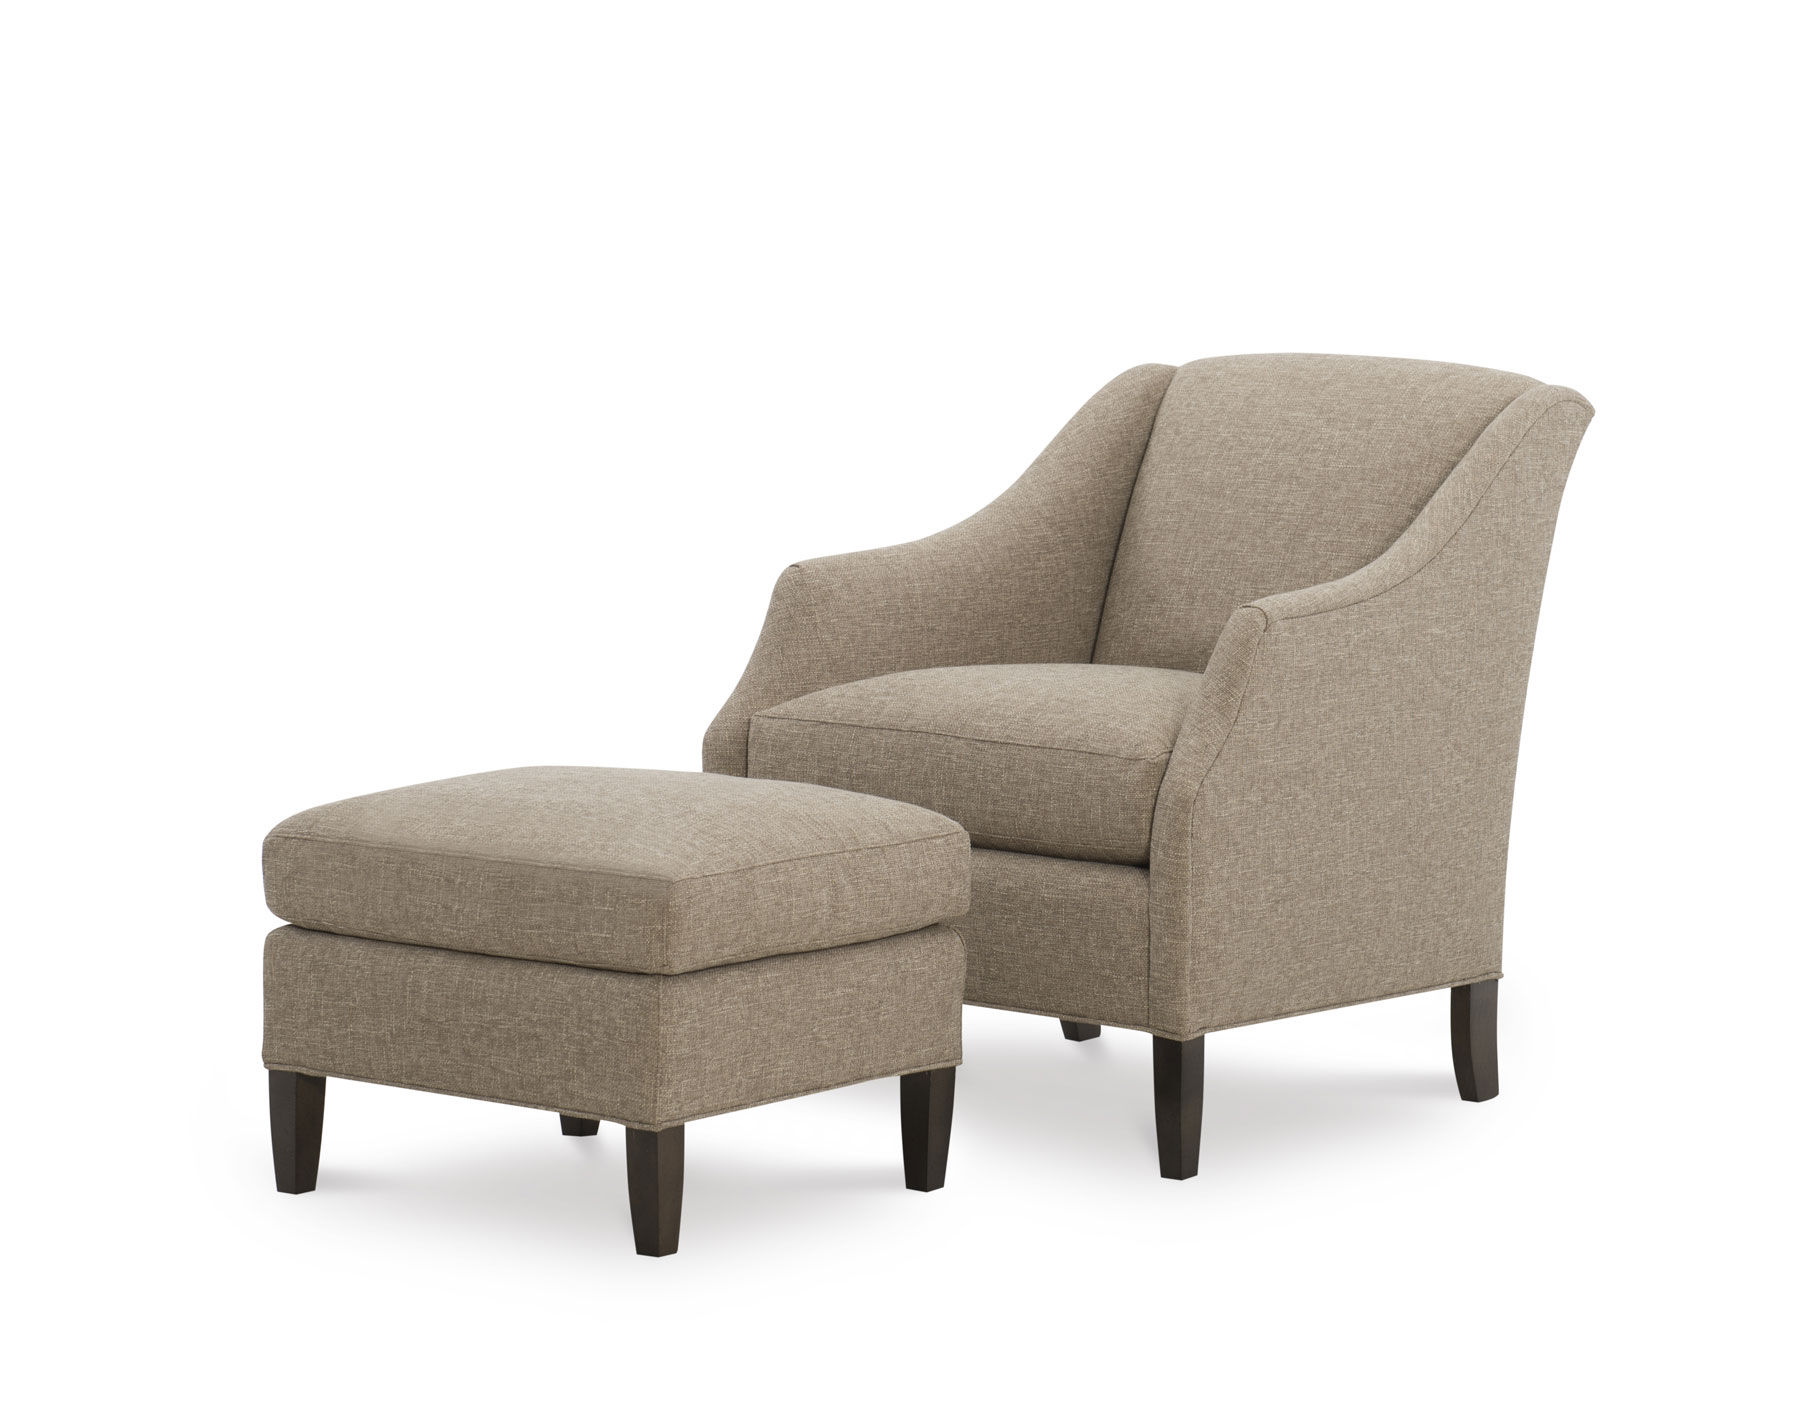 Wesley Hall 578 Milloy Chair and 578-22 Milloy Ottoman